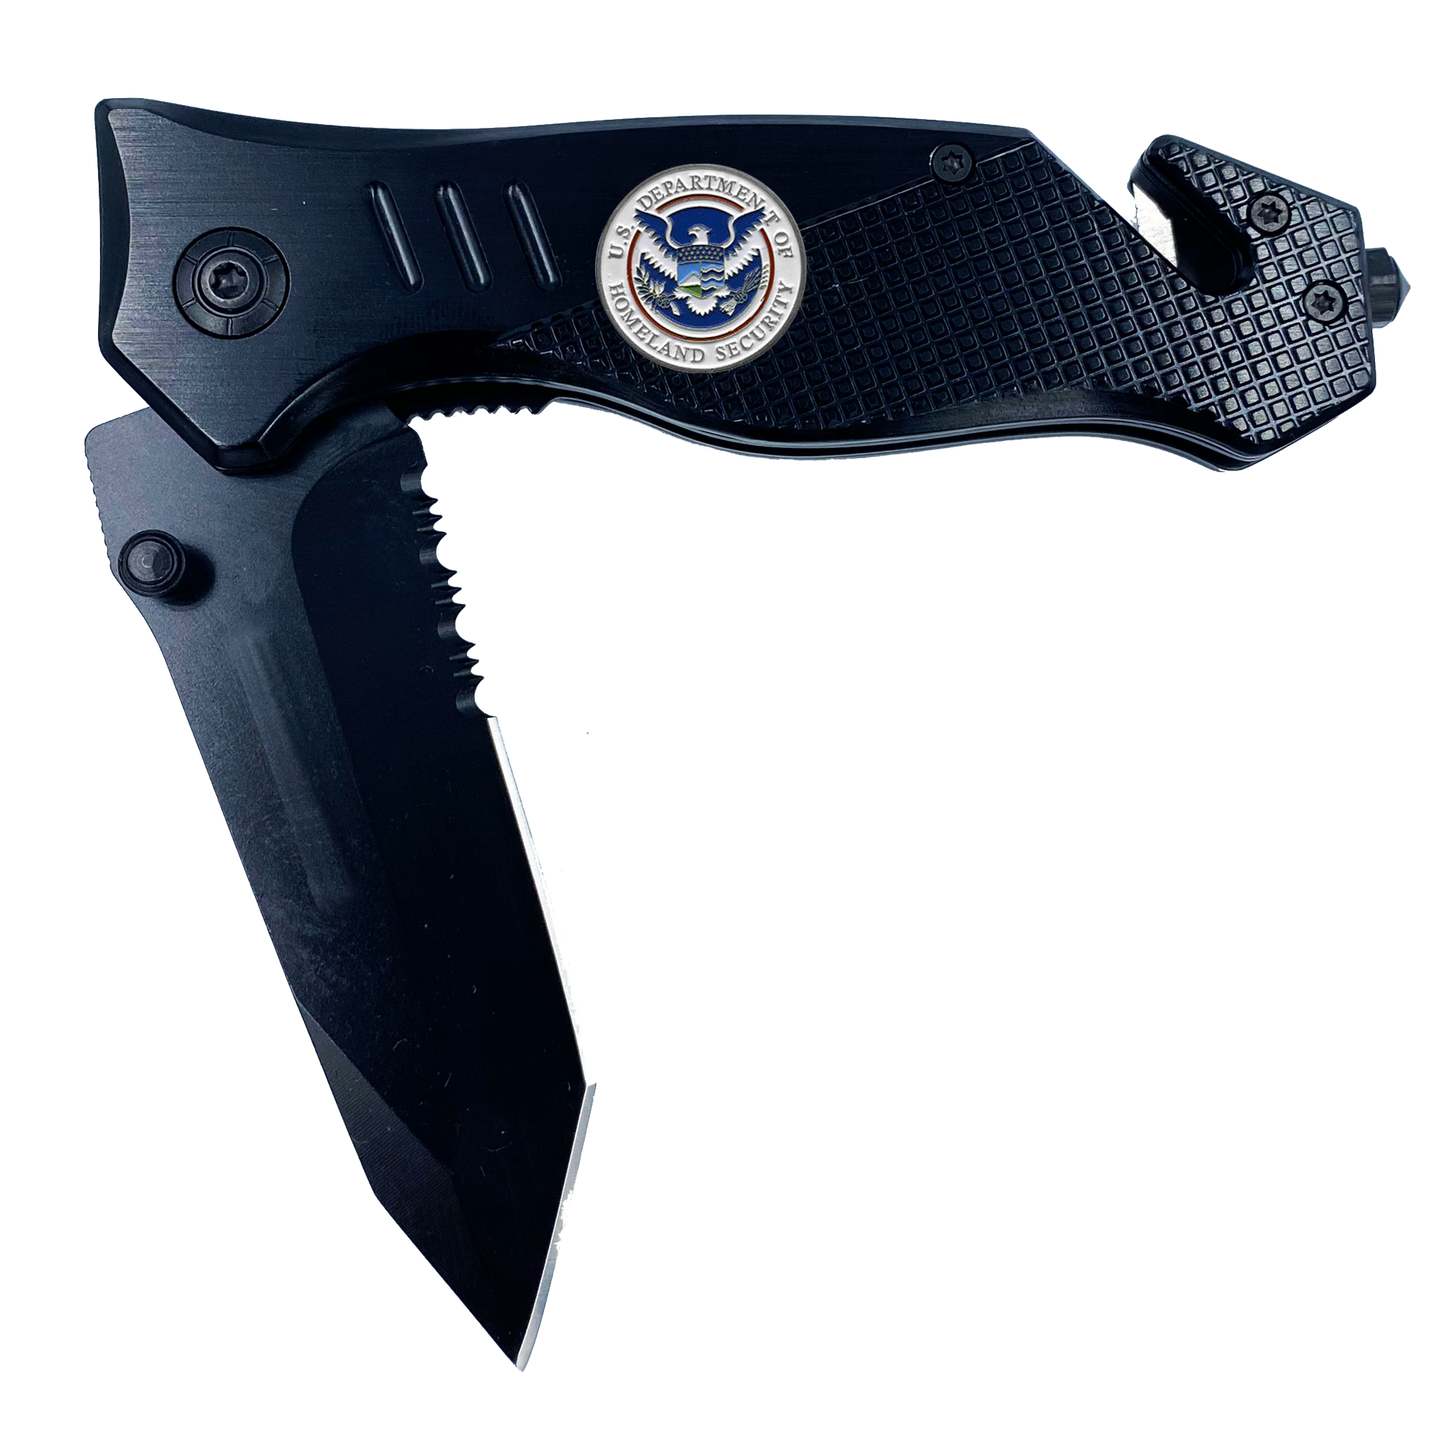 DHS collectible Officer 3-in-1 Police Tactical Rescue tool with Seatbelt Cutter, Steel Serrated Blade, Glass Breaker Homeland Security